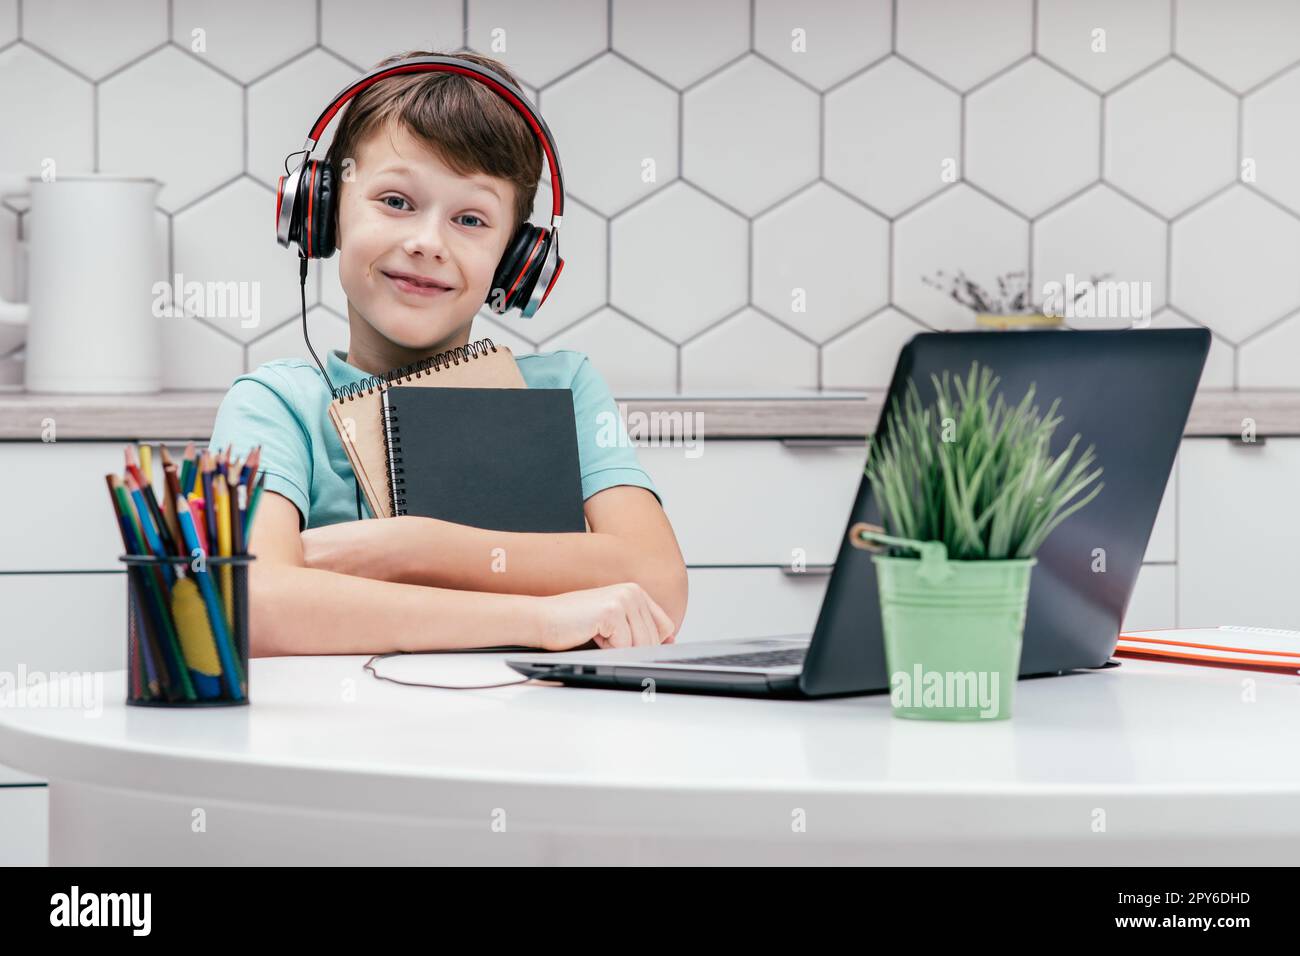 Portrait of young preteen cute boy wearing T-shirt, headphones, sitting in front of laptop, holding cuddling notebooks. Stock Photo